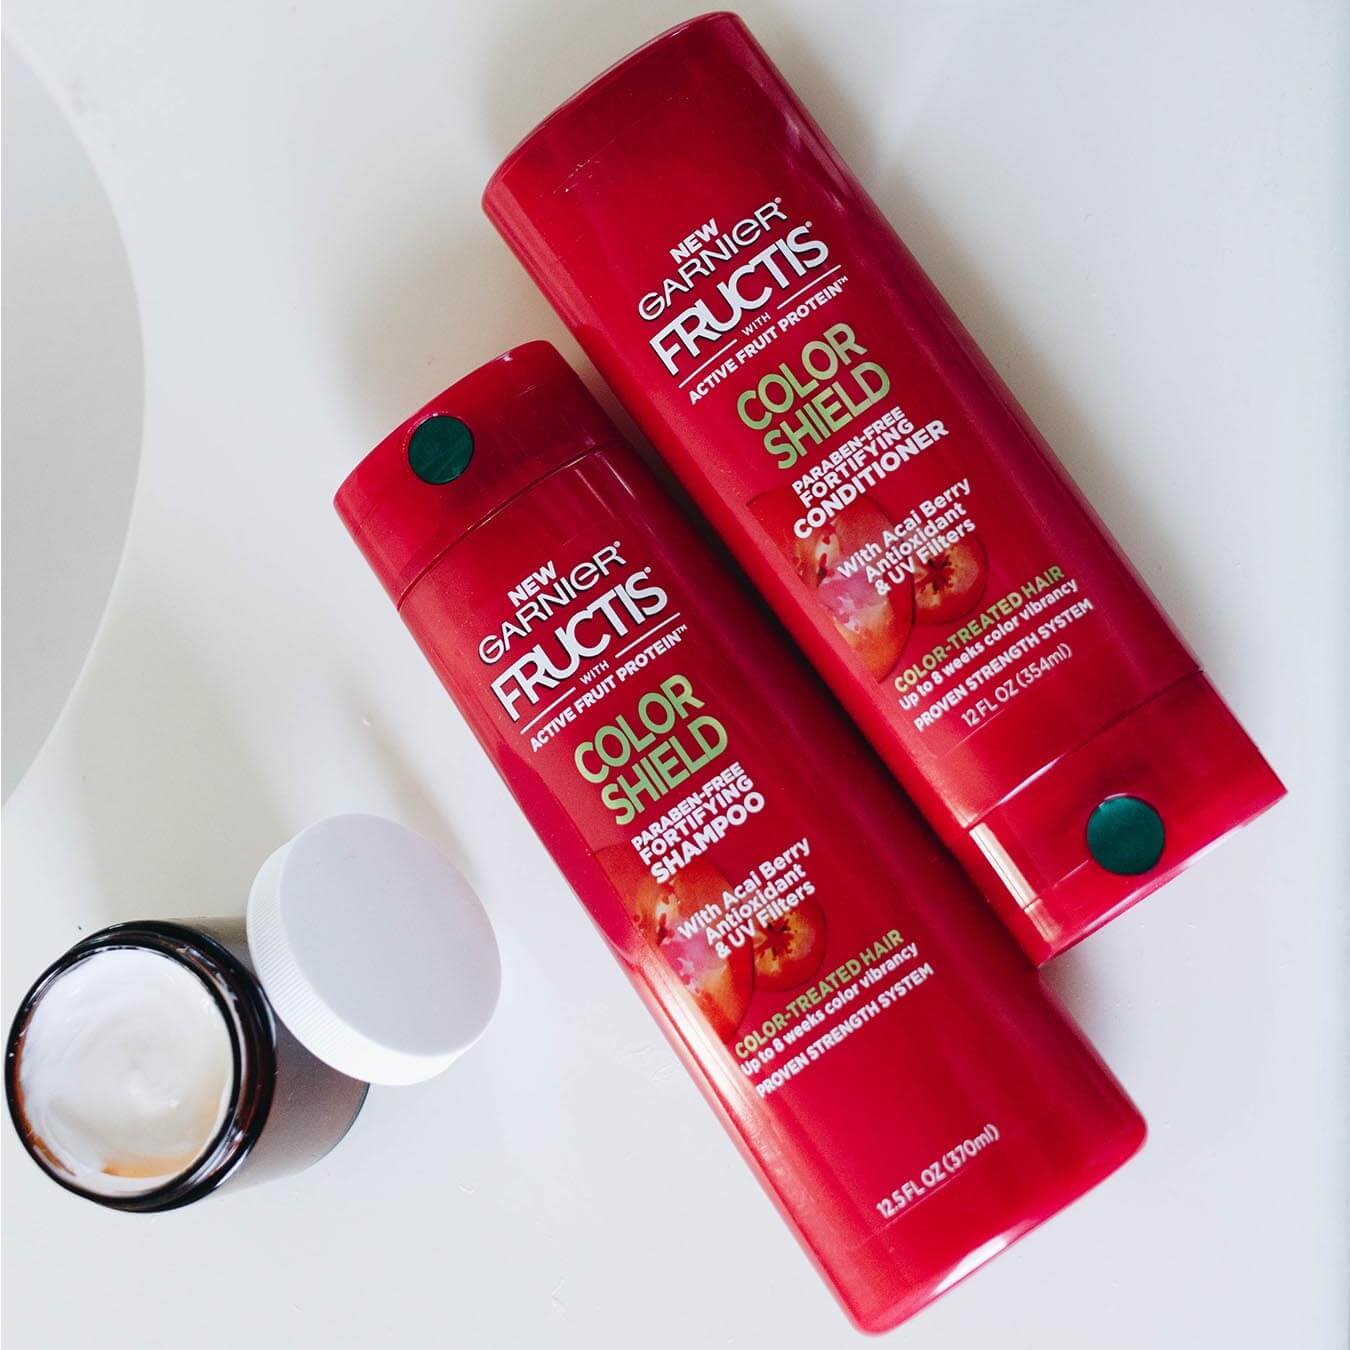 Garnier Fructis Color Shield Fortifying Shampoo and Fructis Color Shield Fortifying Conditioner on a white table next to an open facial cream container.